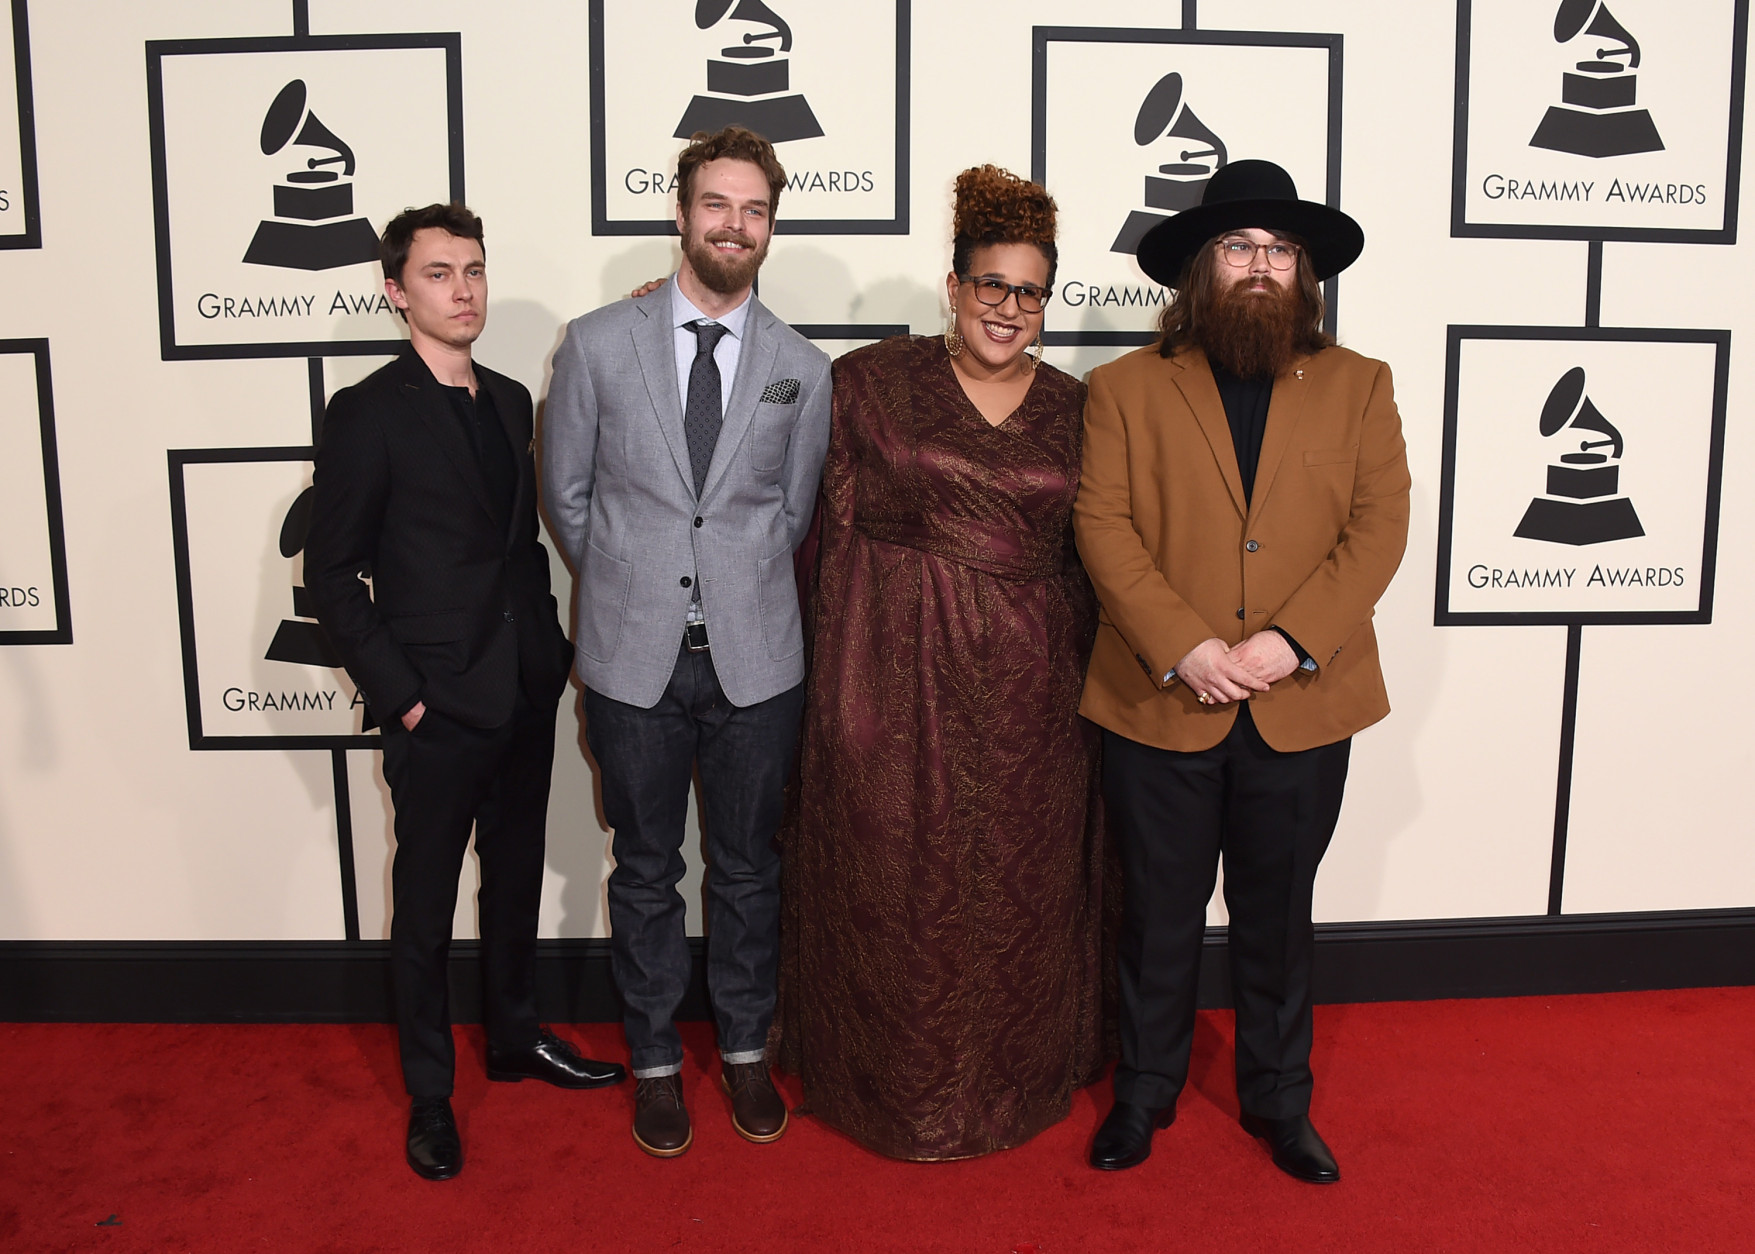 Heath Fogg, from left, Steve Johnson, Brittany Howard, and Zac Cockrell of Alabama Shakes arrive at the 58th annual Grammy Awards at the Staples Center on Monday, Feb. 15, 2016, in Los Angeles. (Photo by Jordan Strauss/Invision/AP)